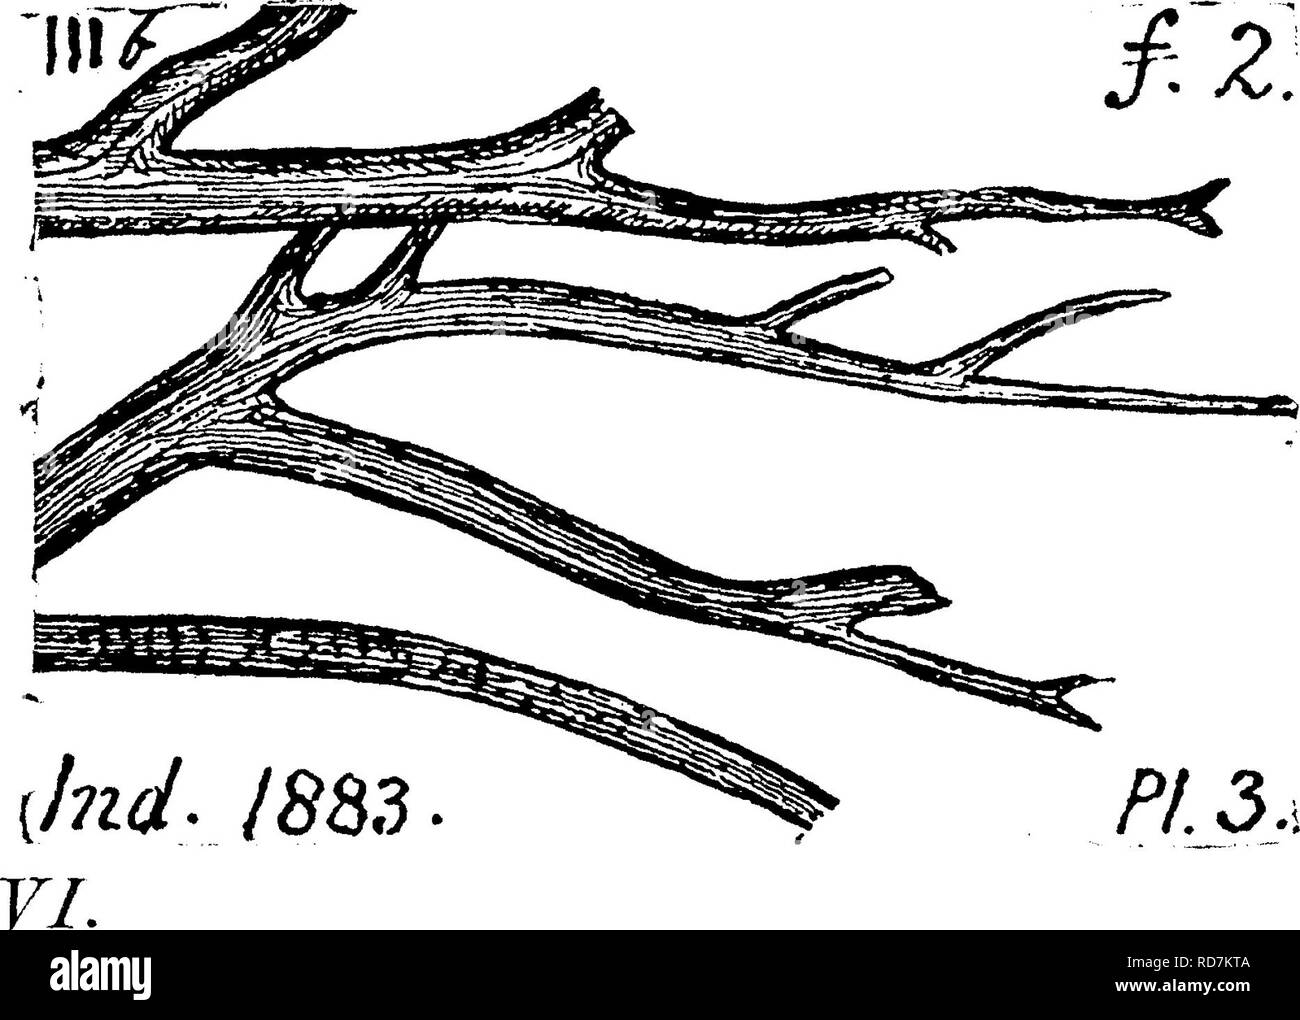 . A dictionary of the fossils of Pennsylvania and neighboring states named in the reports and catalogues of the survey ... Paleontology. PSEU. 804 Pseudopecopteris sillimani. Lesq. (Pecopteris silli- mani, Bgt.) Geol. 111. IV, p. 401) Coal Flora, p. 206, pi. 87. fig. 3; under Campbell's Ledge conglomerate, Pittston, Pa.; Mazon Creek nodules, Illinois; also by White at bottom of Powelton shales, over coal B, Broad Top, Fa. (T3, p. 62) XII, Xlll, Note. Lesquereux said in 111. Kt, 1870, that it is one of the rarest species in American coal measures. Pseudopecopteris speciosa, Lesq. Coal Flora, pa Stock Photo